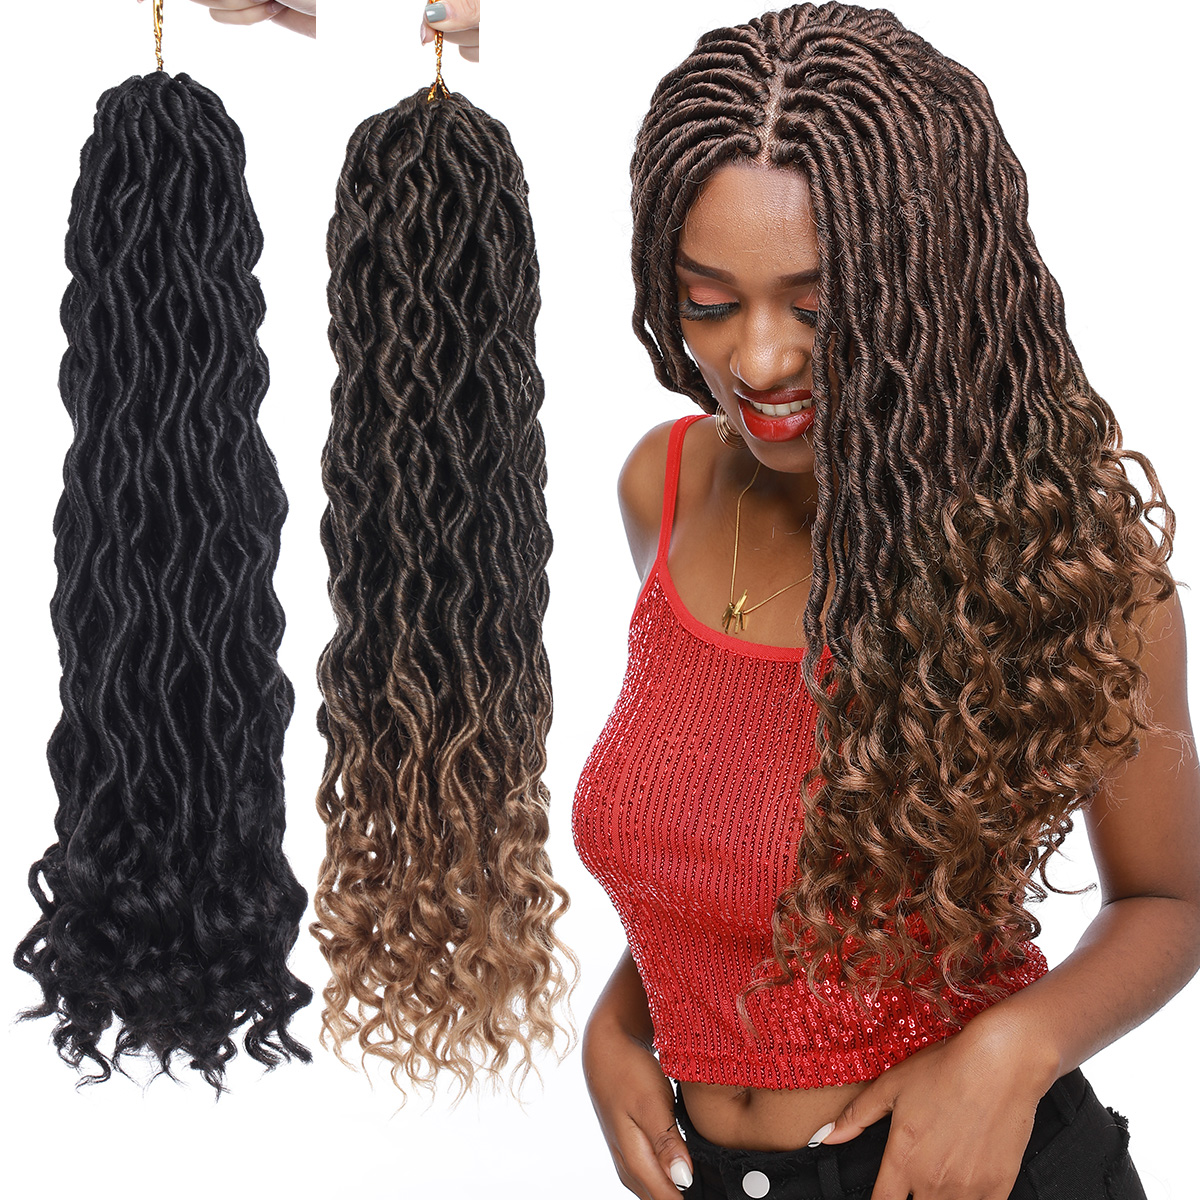 SEGO Faux Locs Crochet Braids Hair Synthetic Braiding Hair Real Soft Wave Curly Black Hair Extensions Ombre Dreadlocks Hairstyles - image 1 of 10